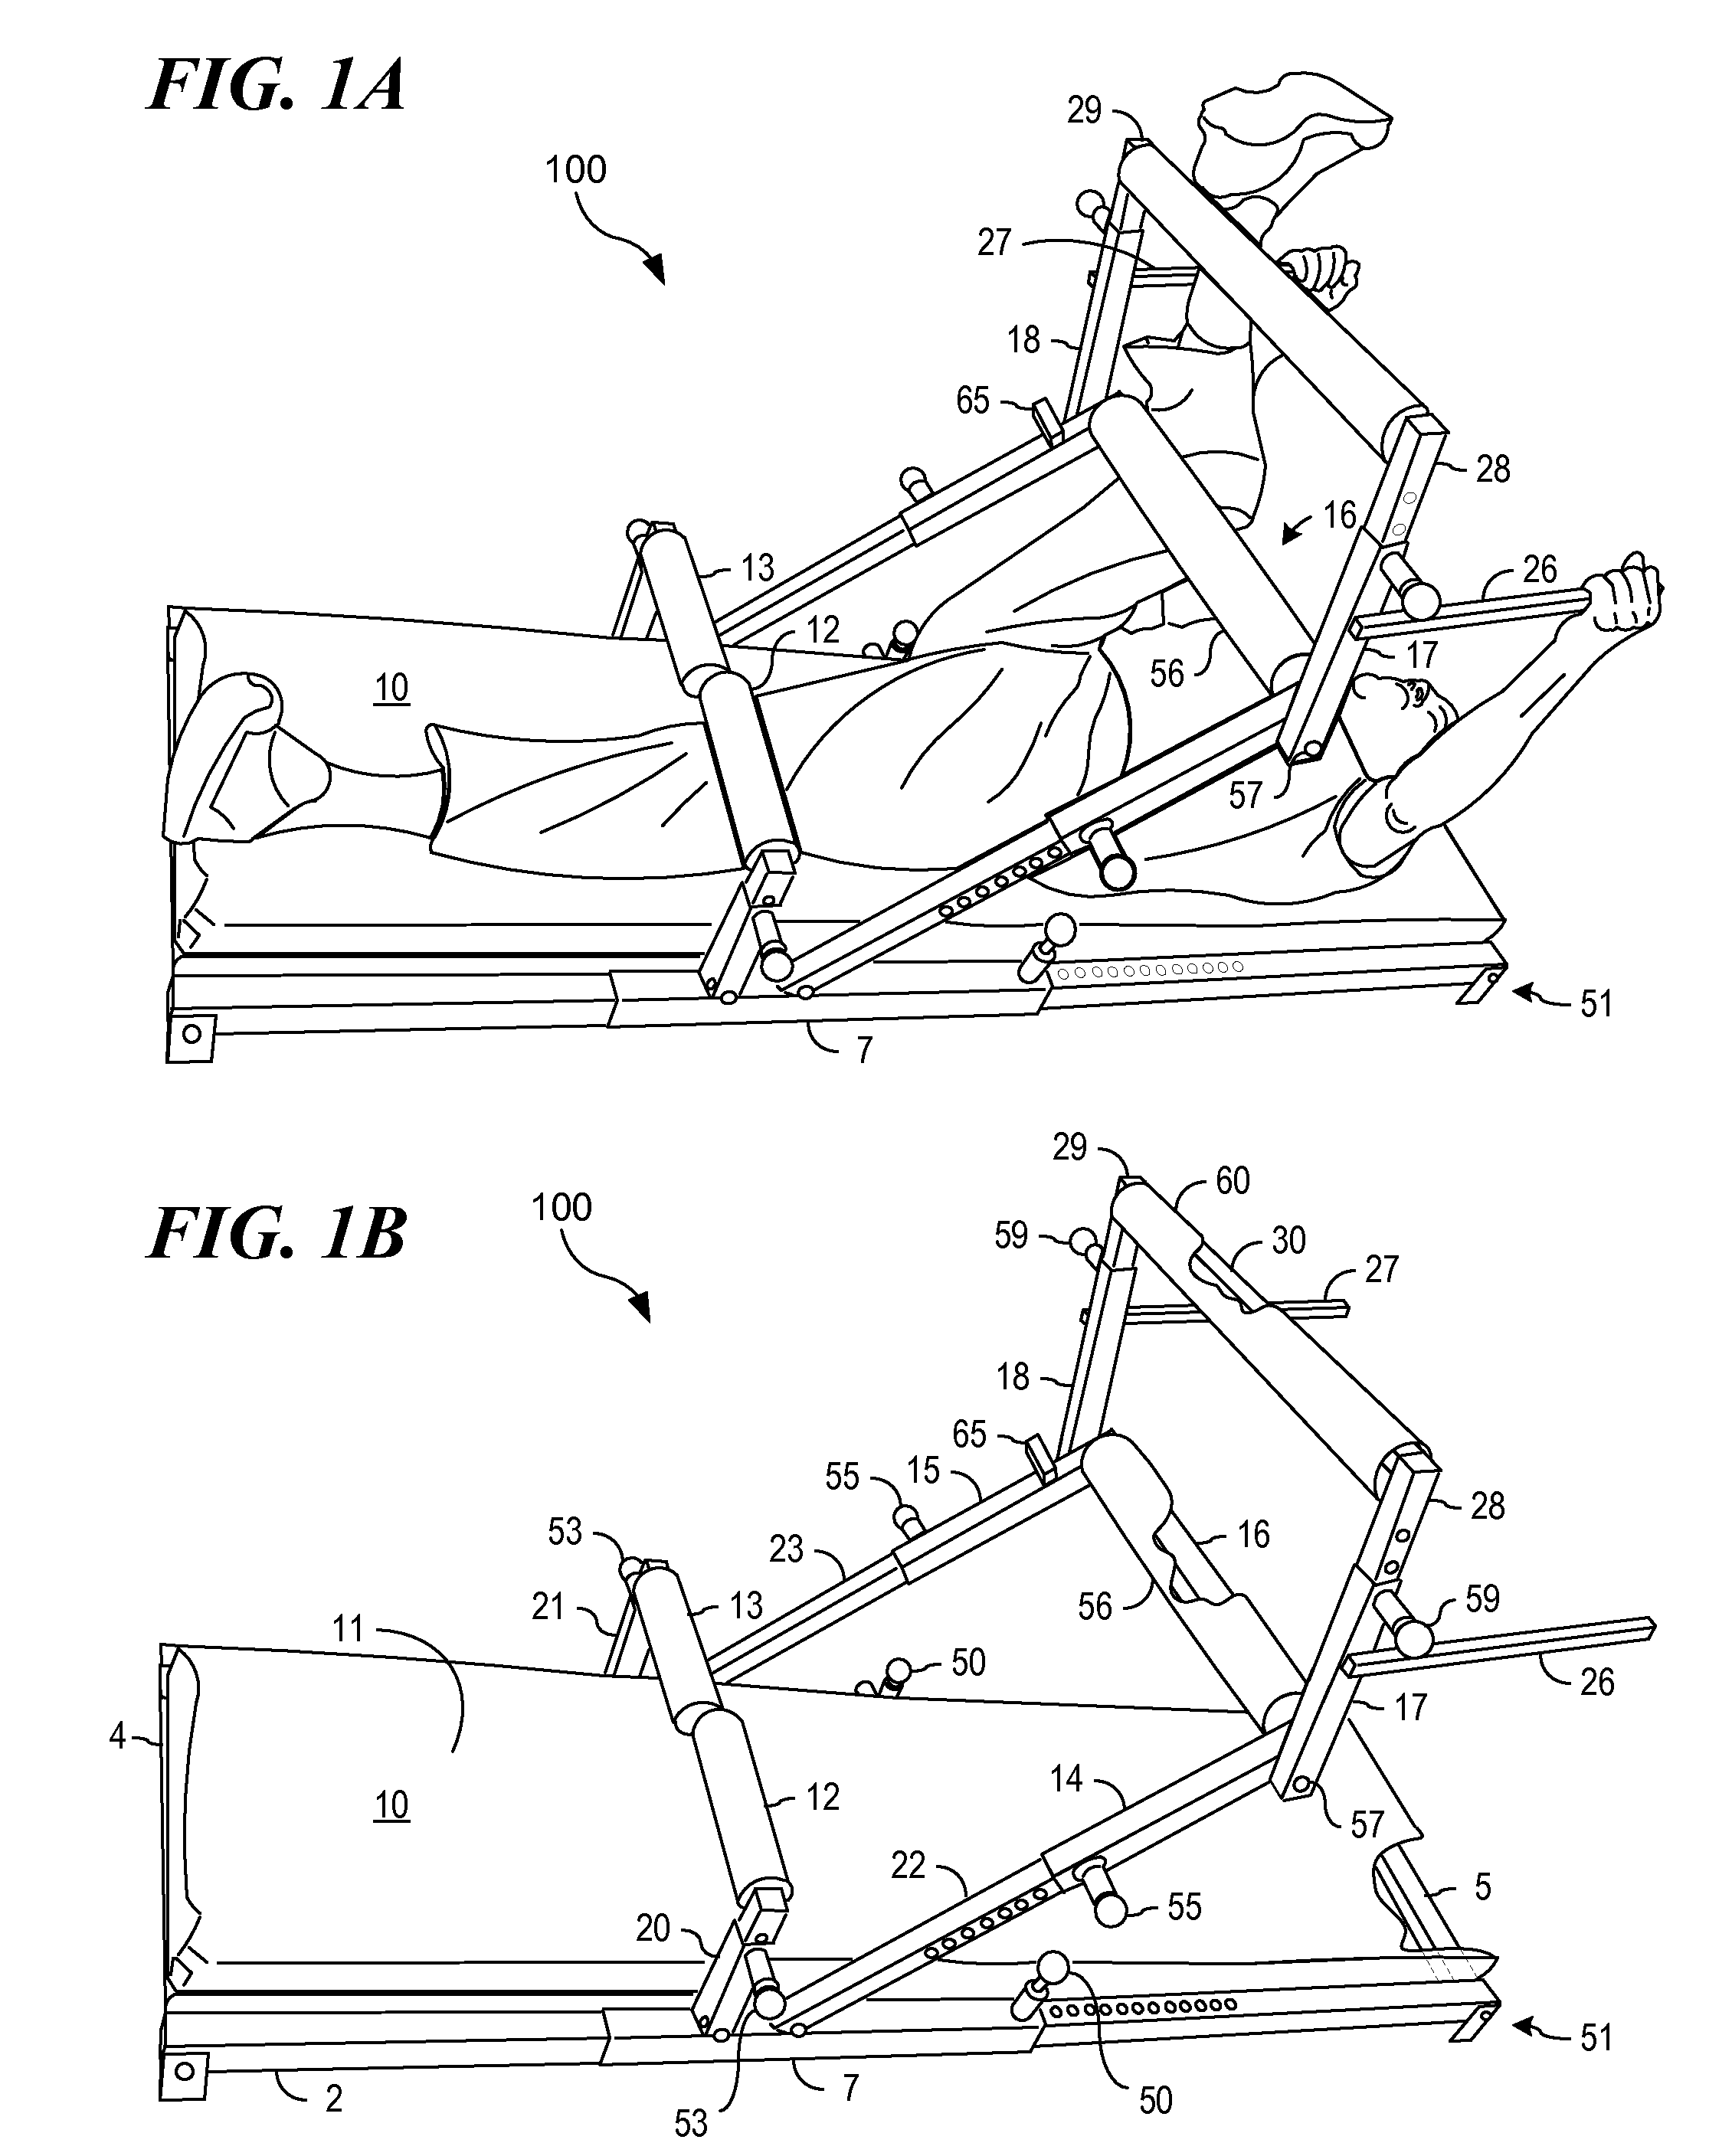 Stretching and conditioning apparatus